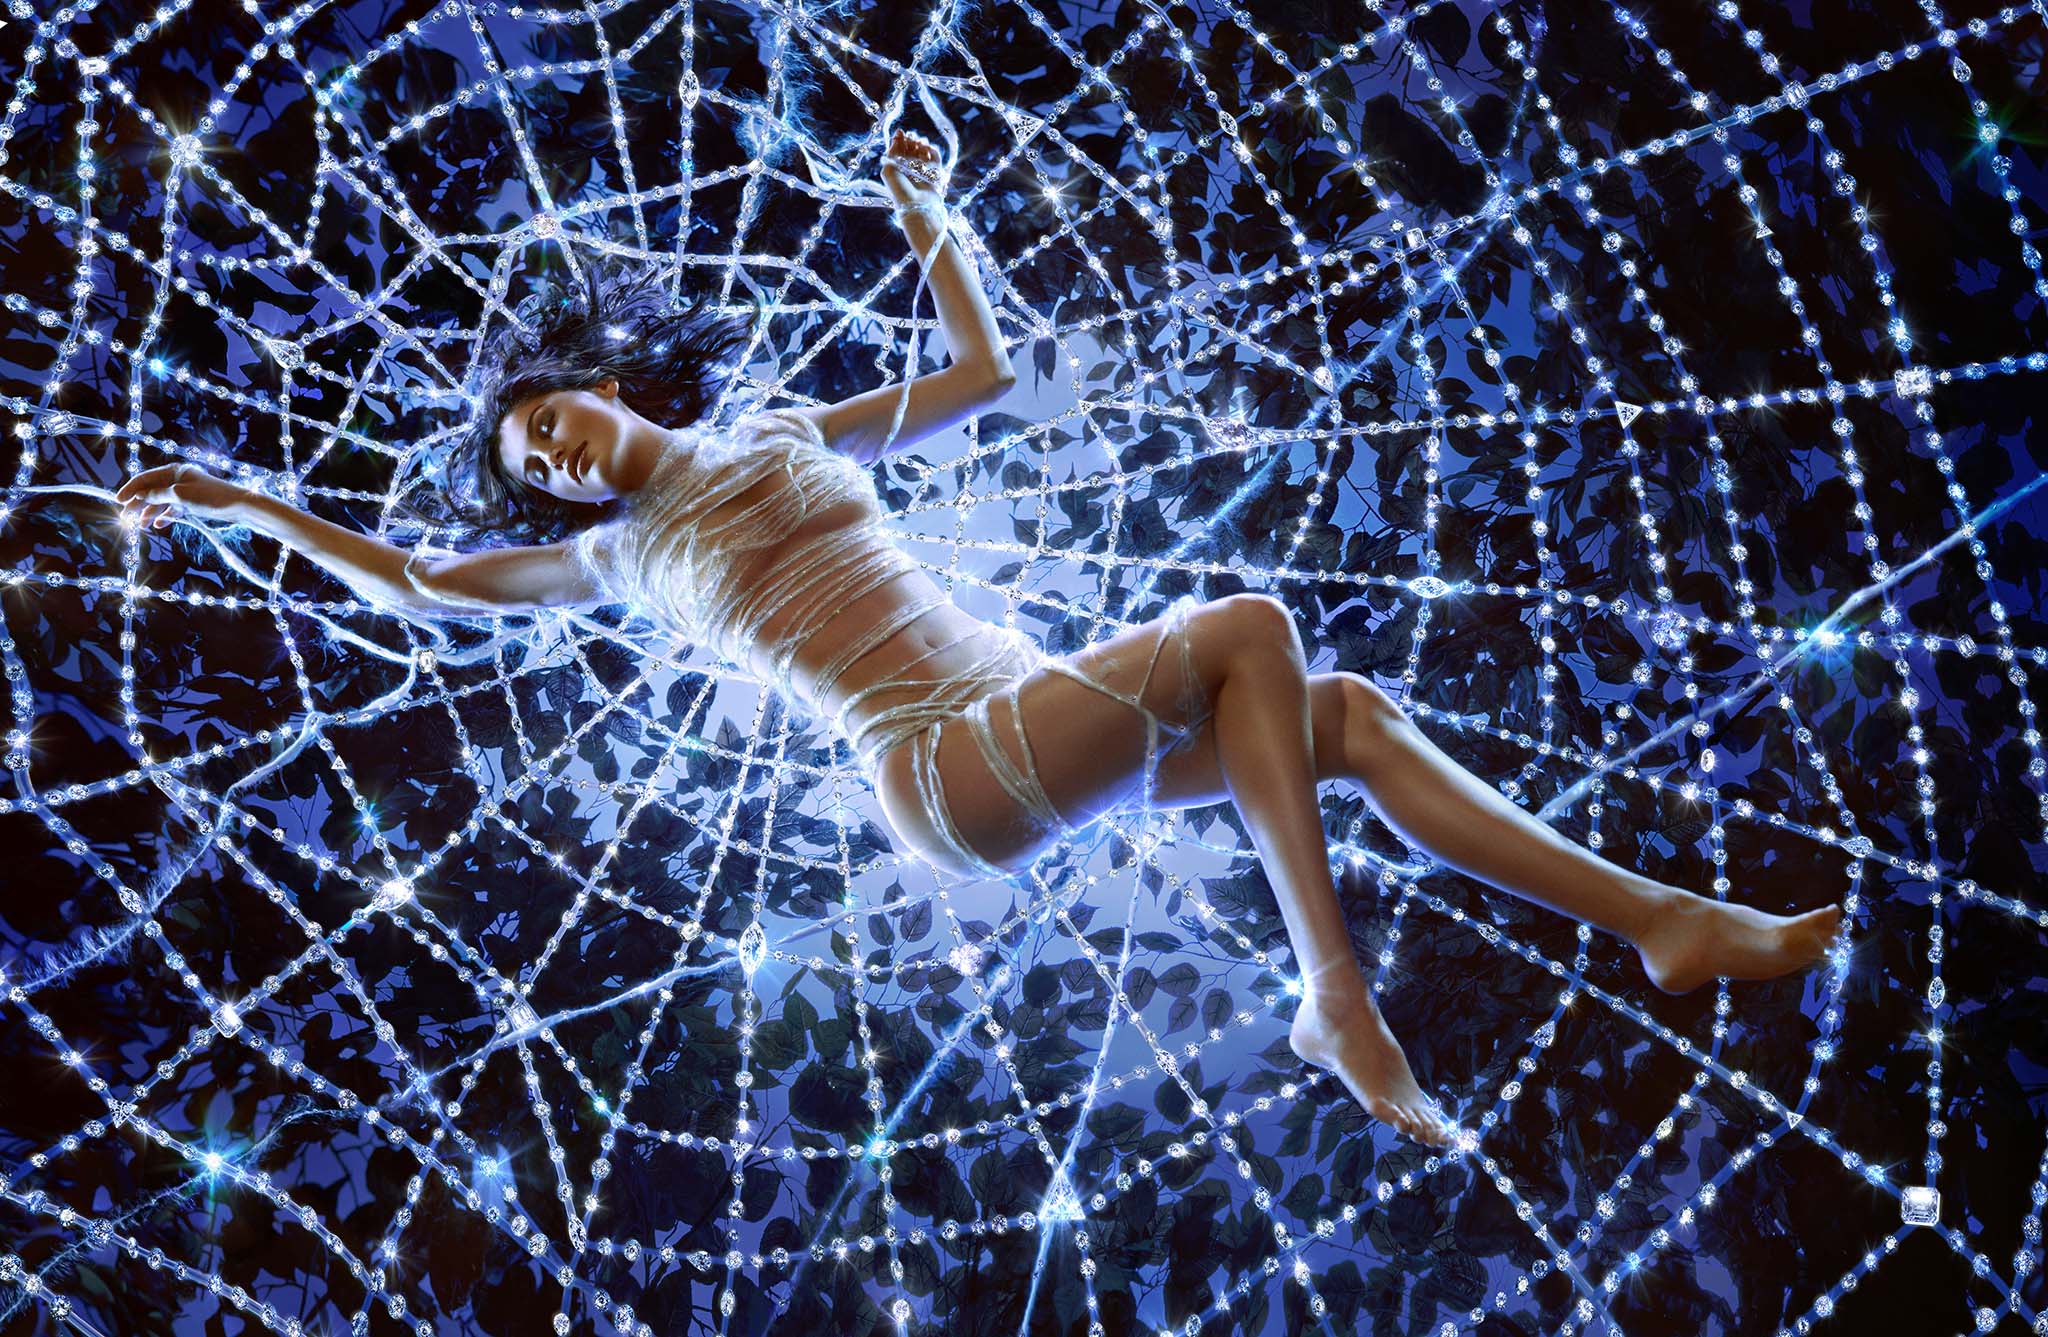 Cover image: In order to suspend French model Laetita Casta for this advertising shoot for diamond.com in a life size “spyder net”, high above a 4×6′ Broncolor Cumulite, itself rigged up on 2 massive crank stands, this set required a great amount of solid and reliable grip. Any failure of the equipment would have resulted in catastrophe. (image by Markus Klinko).